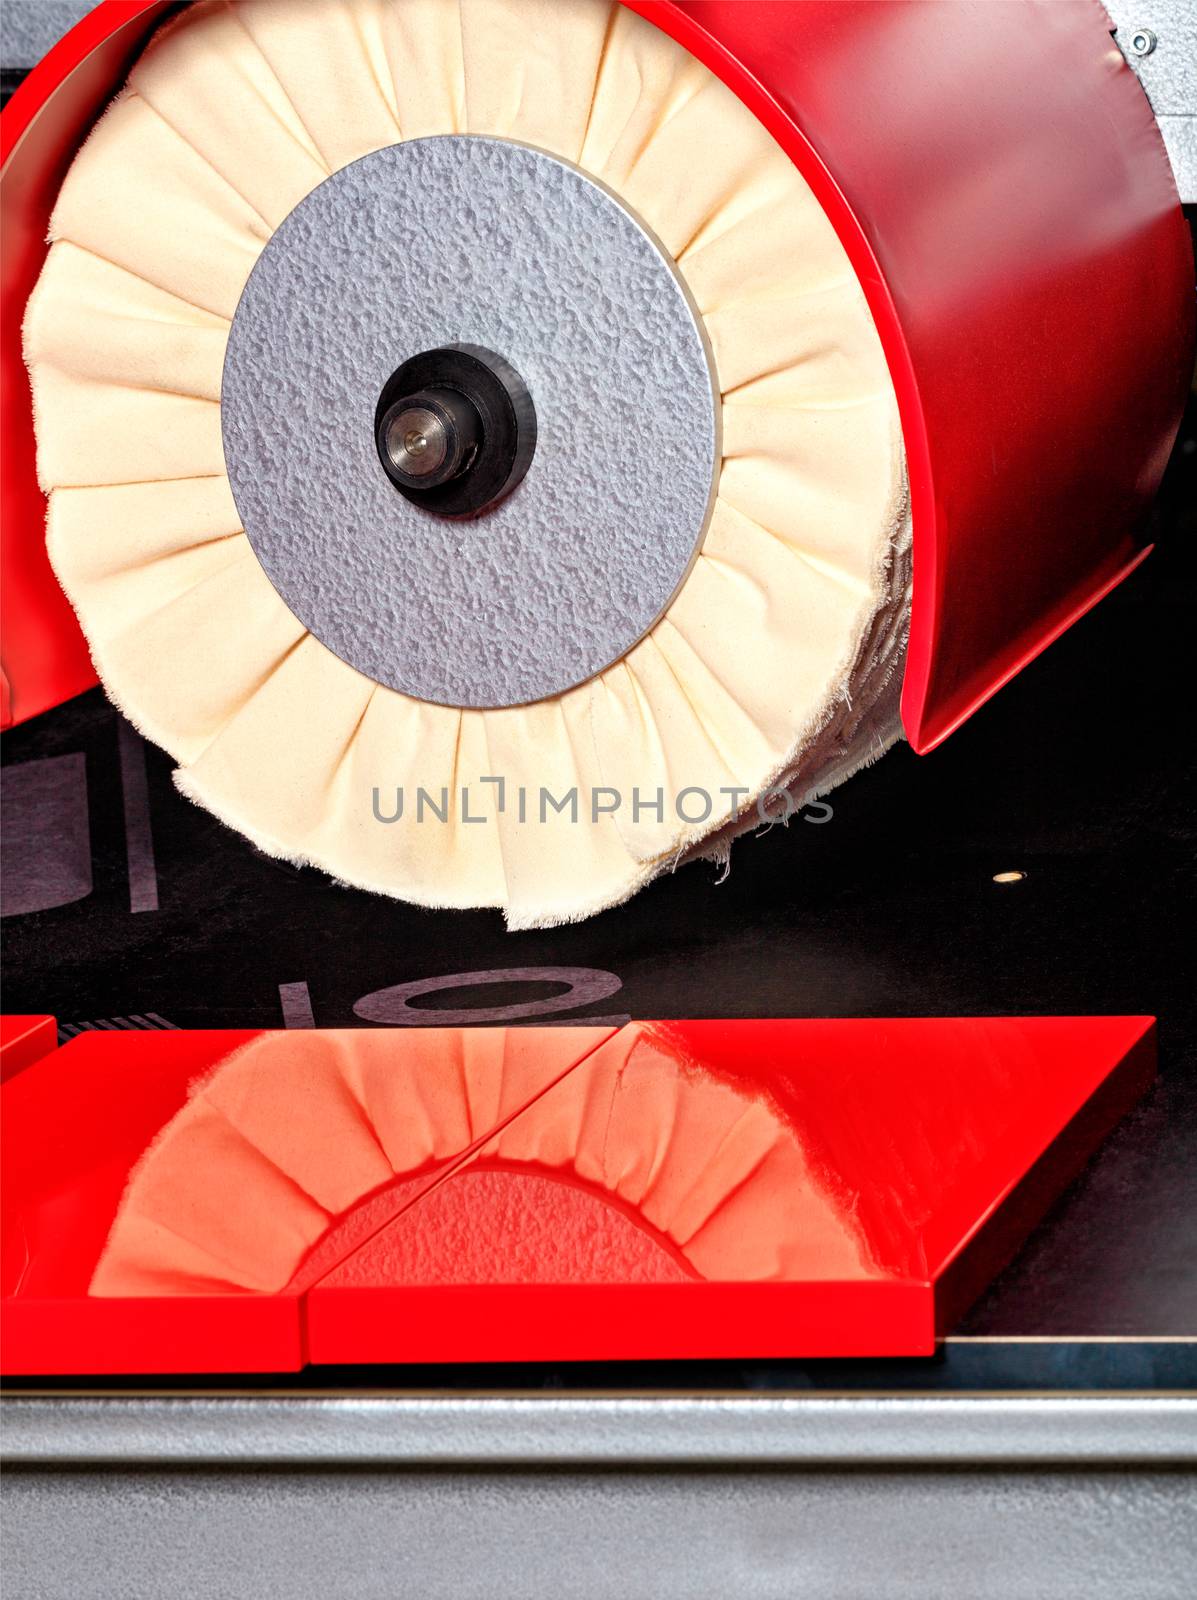 Modern disk polishing machine for grinding and polishing the facade of furniture plates and structures, close-up. by Sergii